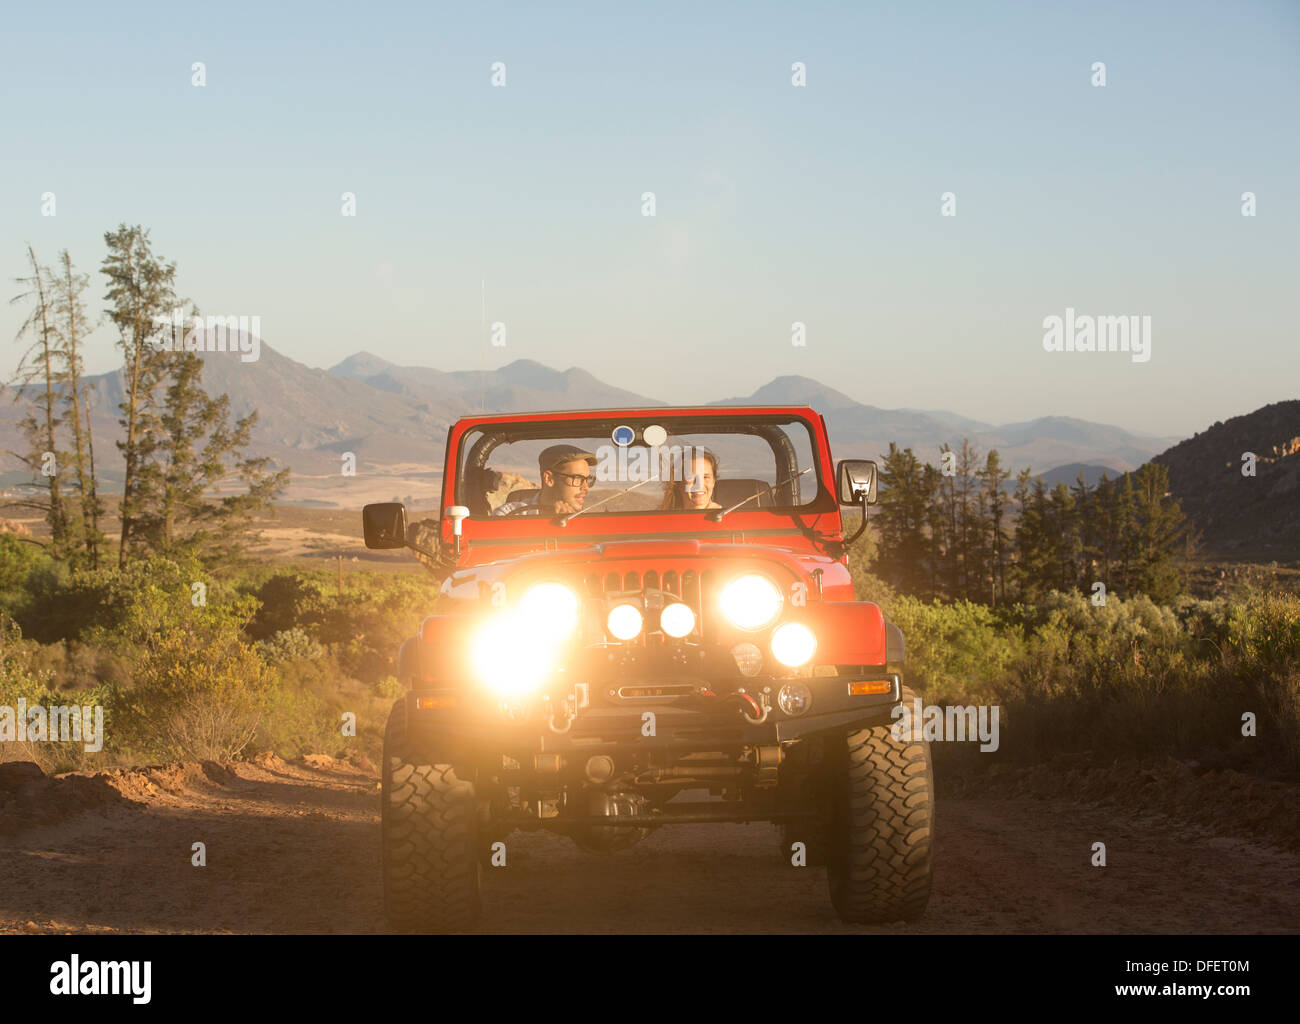 Couple driving sport utility vehicle on dirt road Stock Photo